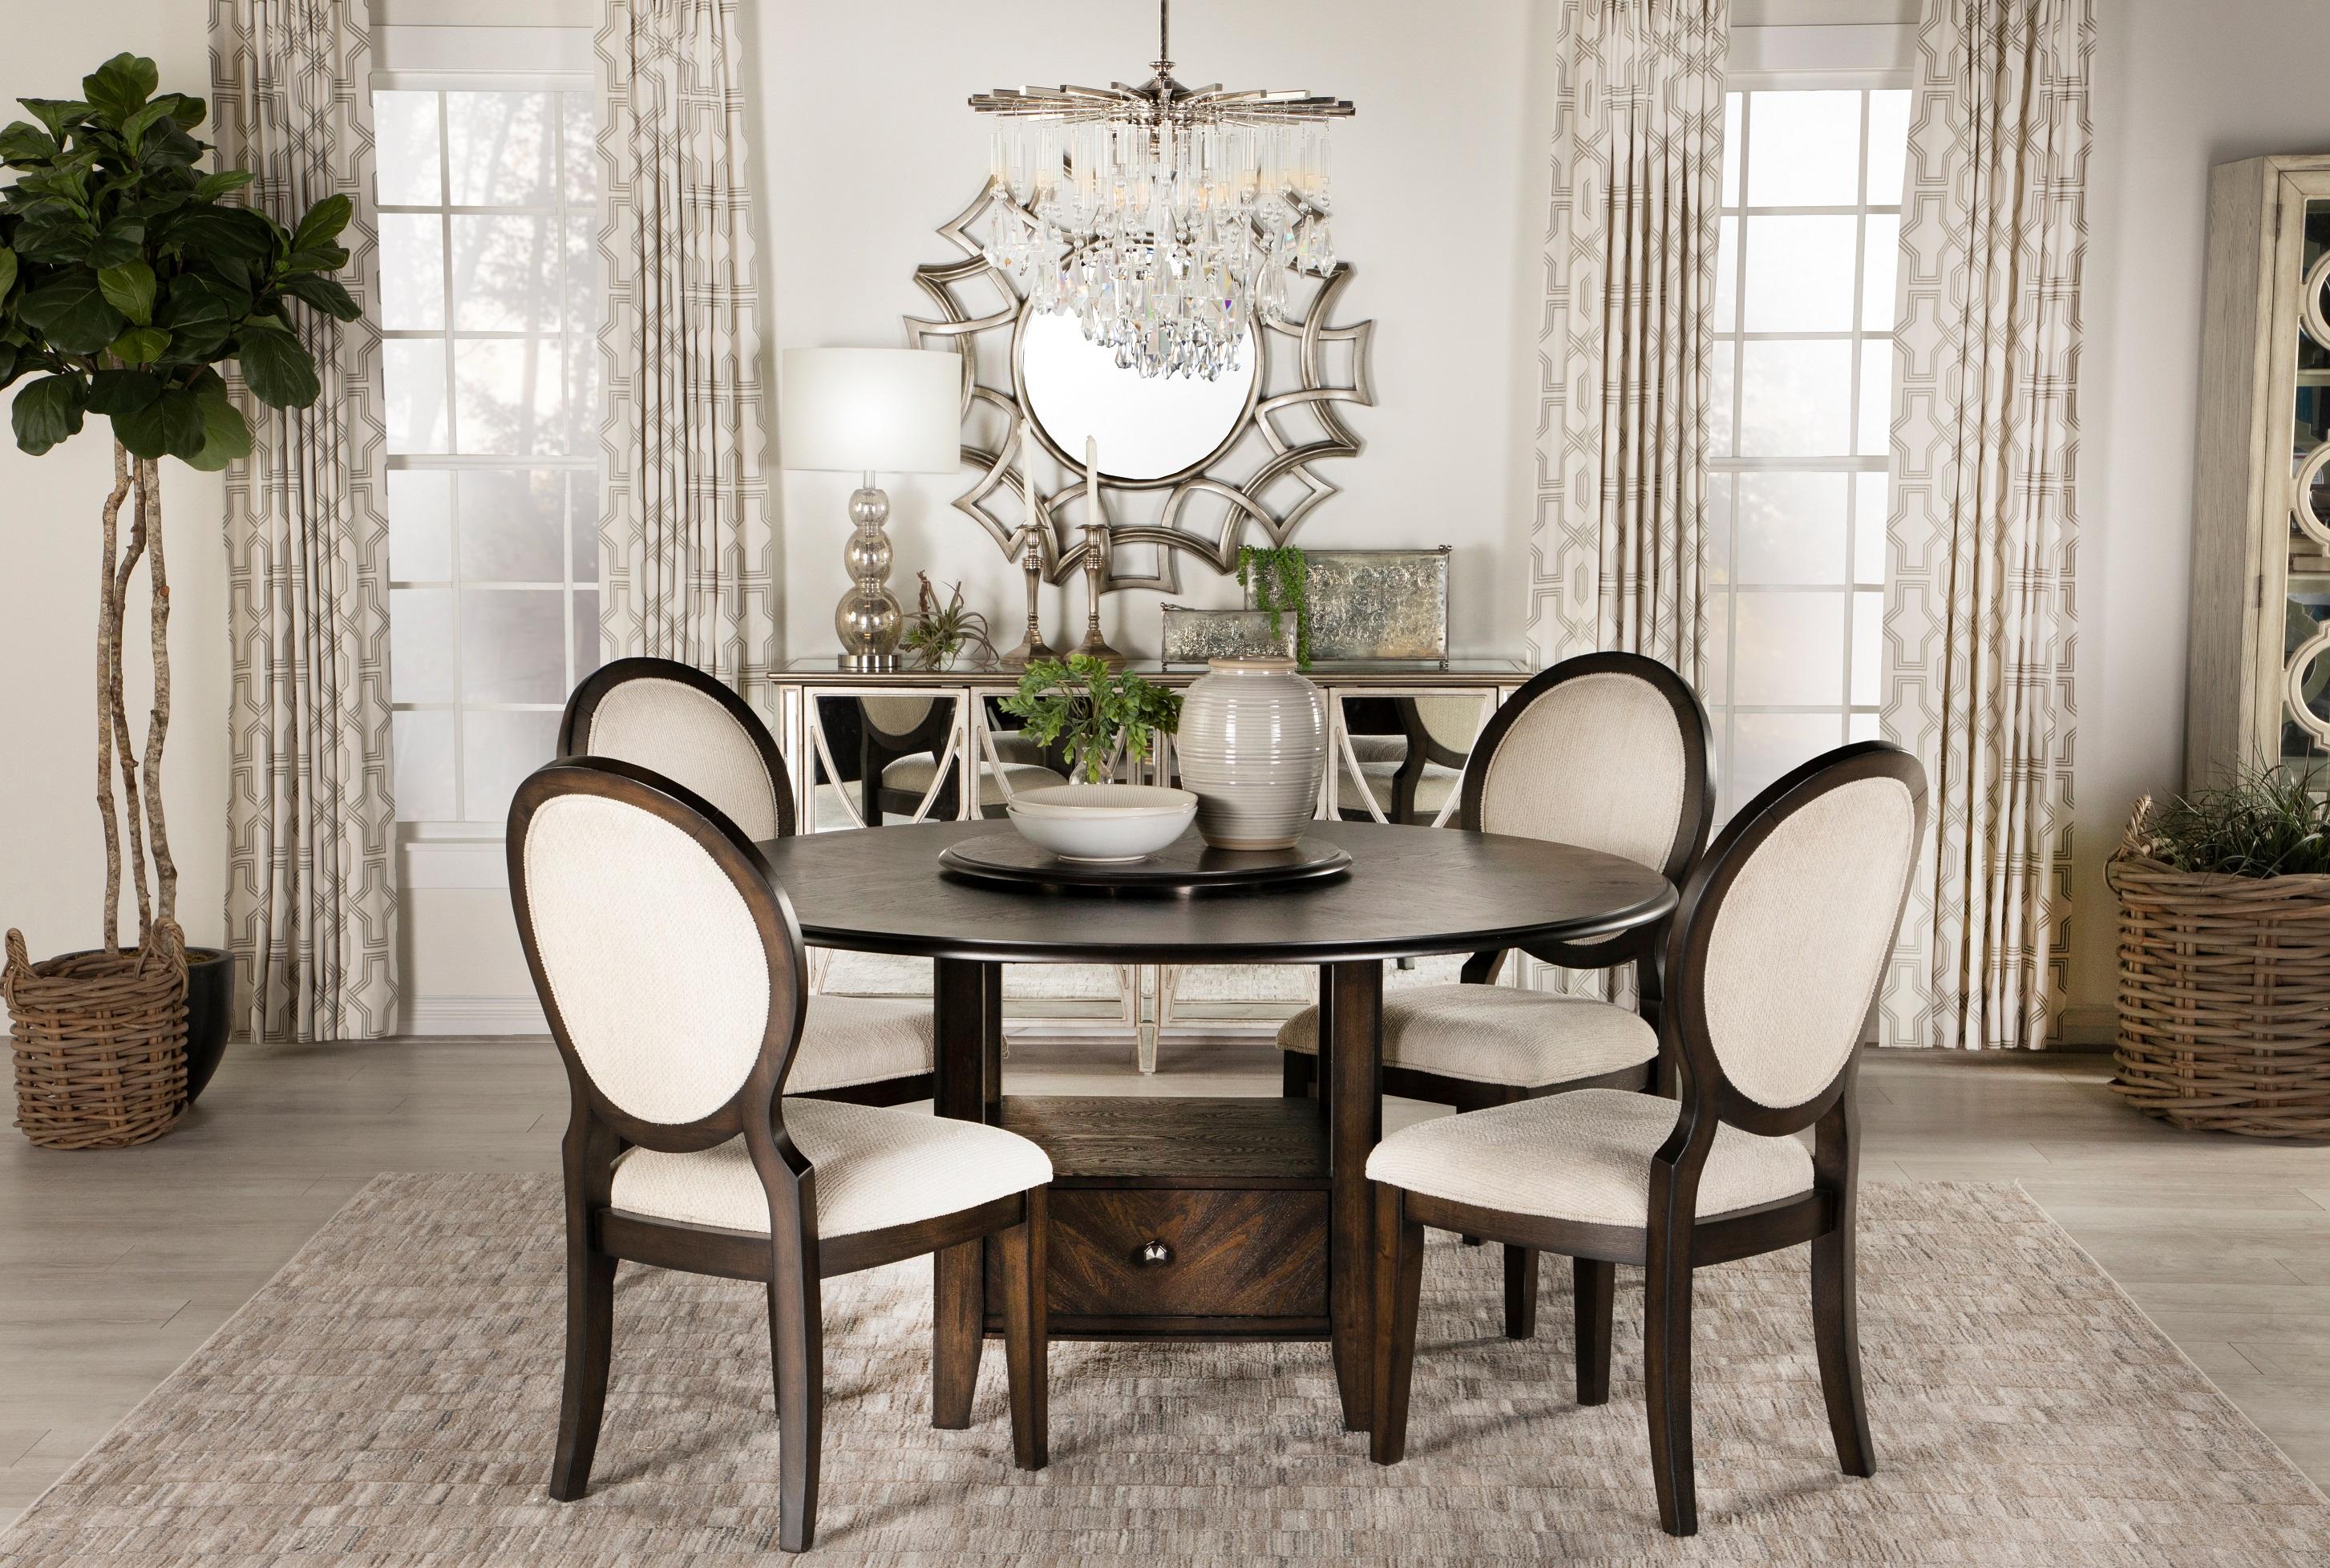 Transitional Dining Room Set 115101-S5 Twyla 115101-S5 in Cocoa 